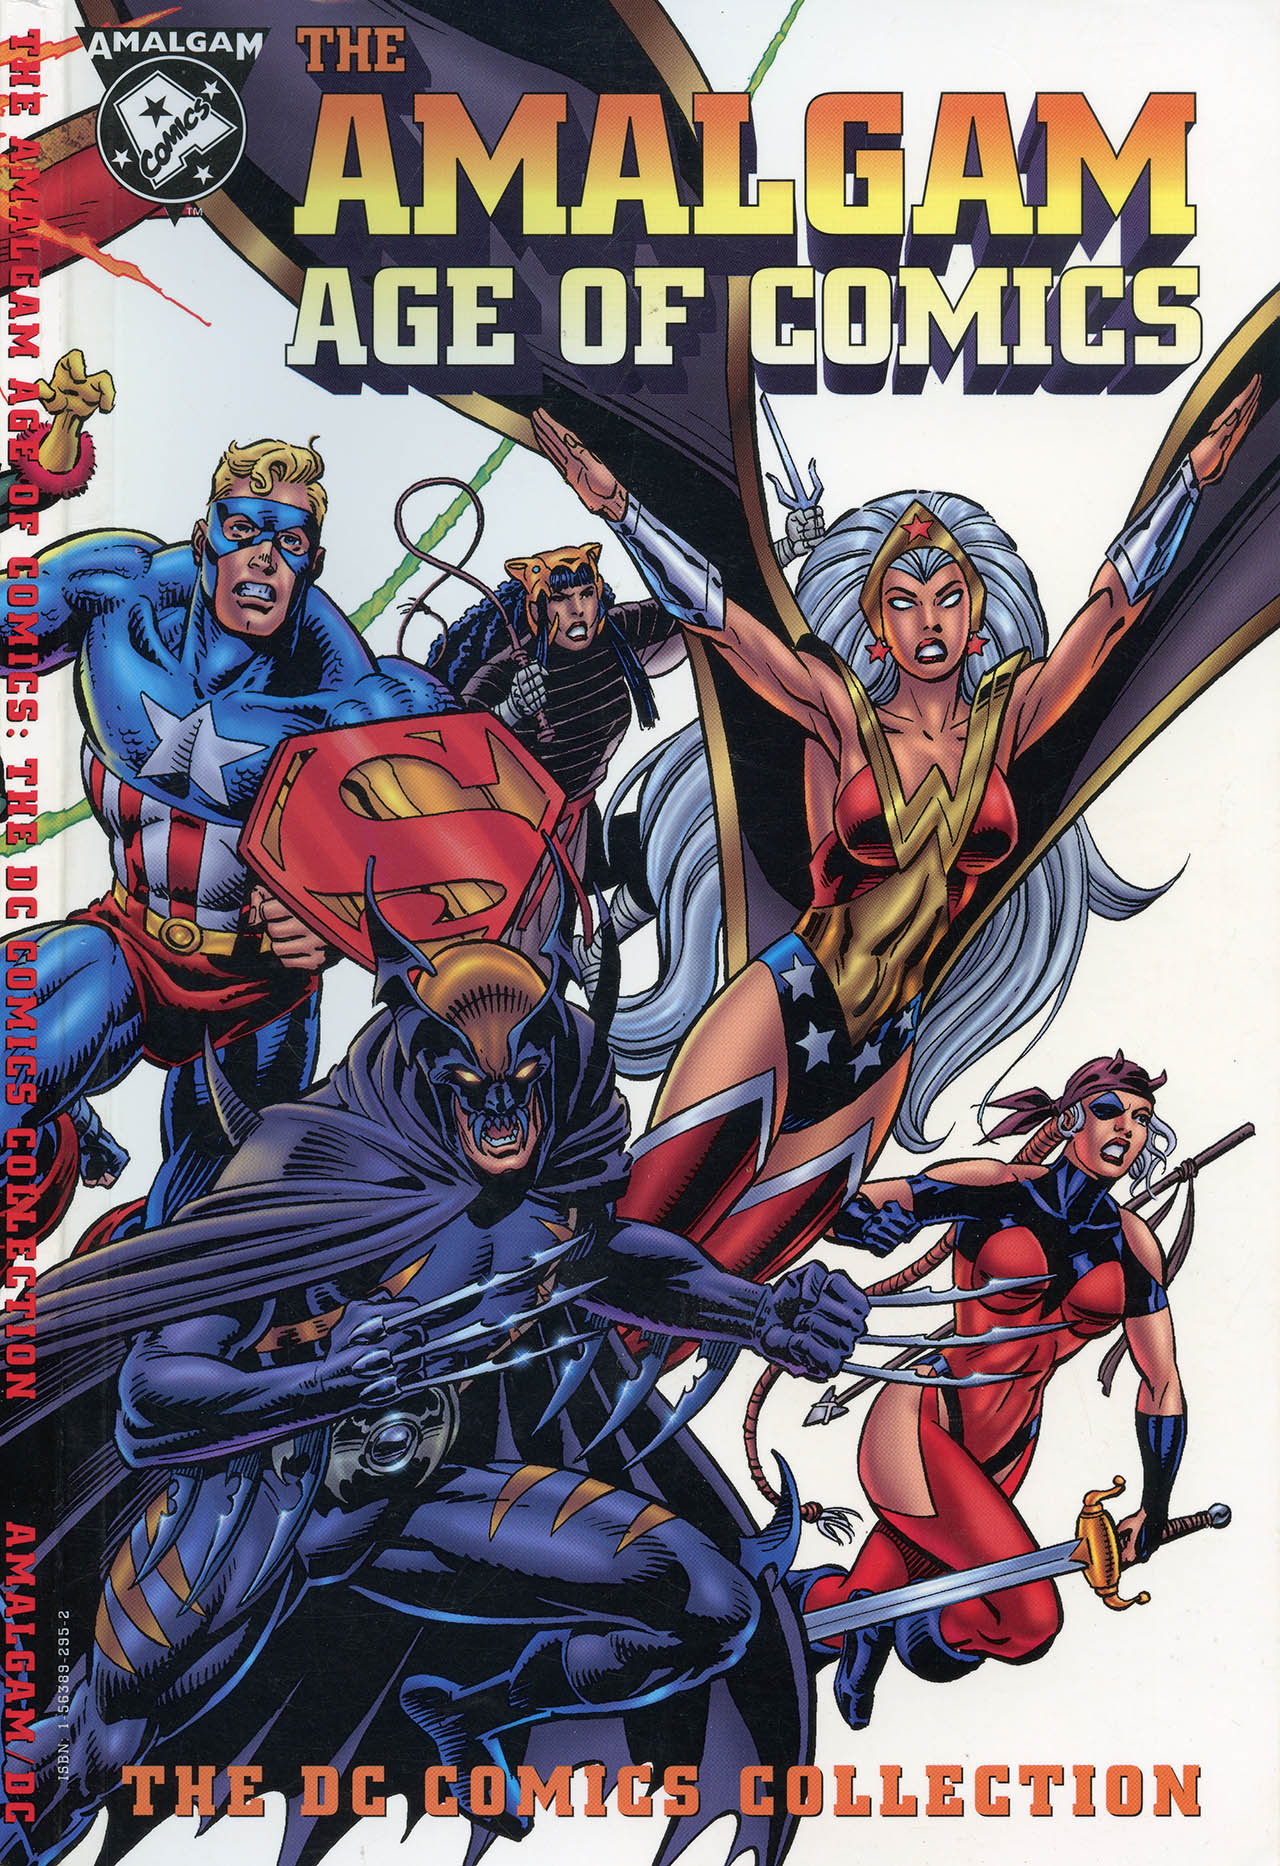 Read online The Amalgam Age of Comics: The DC Comics Collection comic -  Issue # TPB (Part 1) - 2